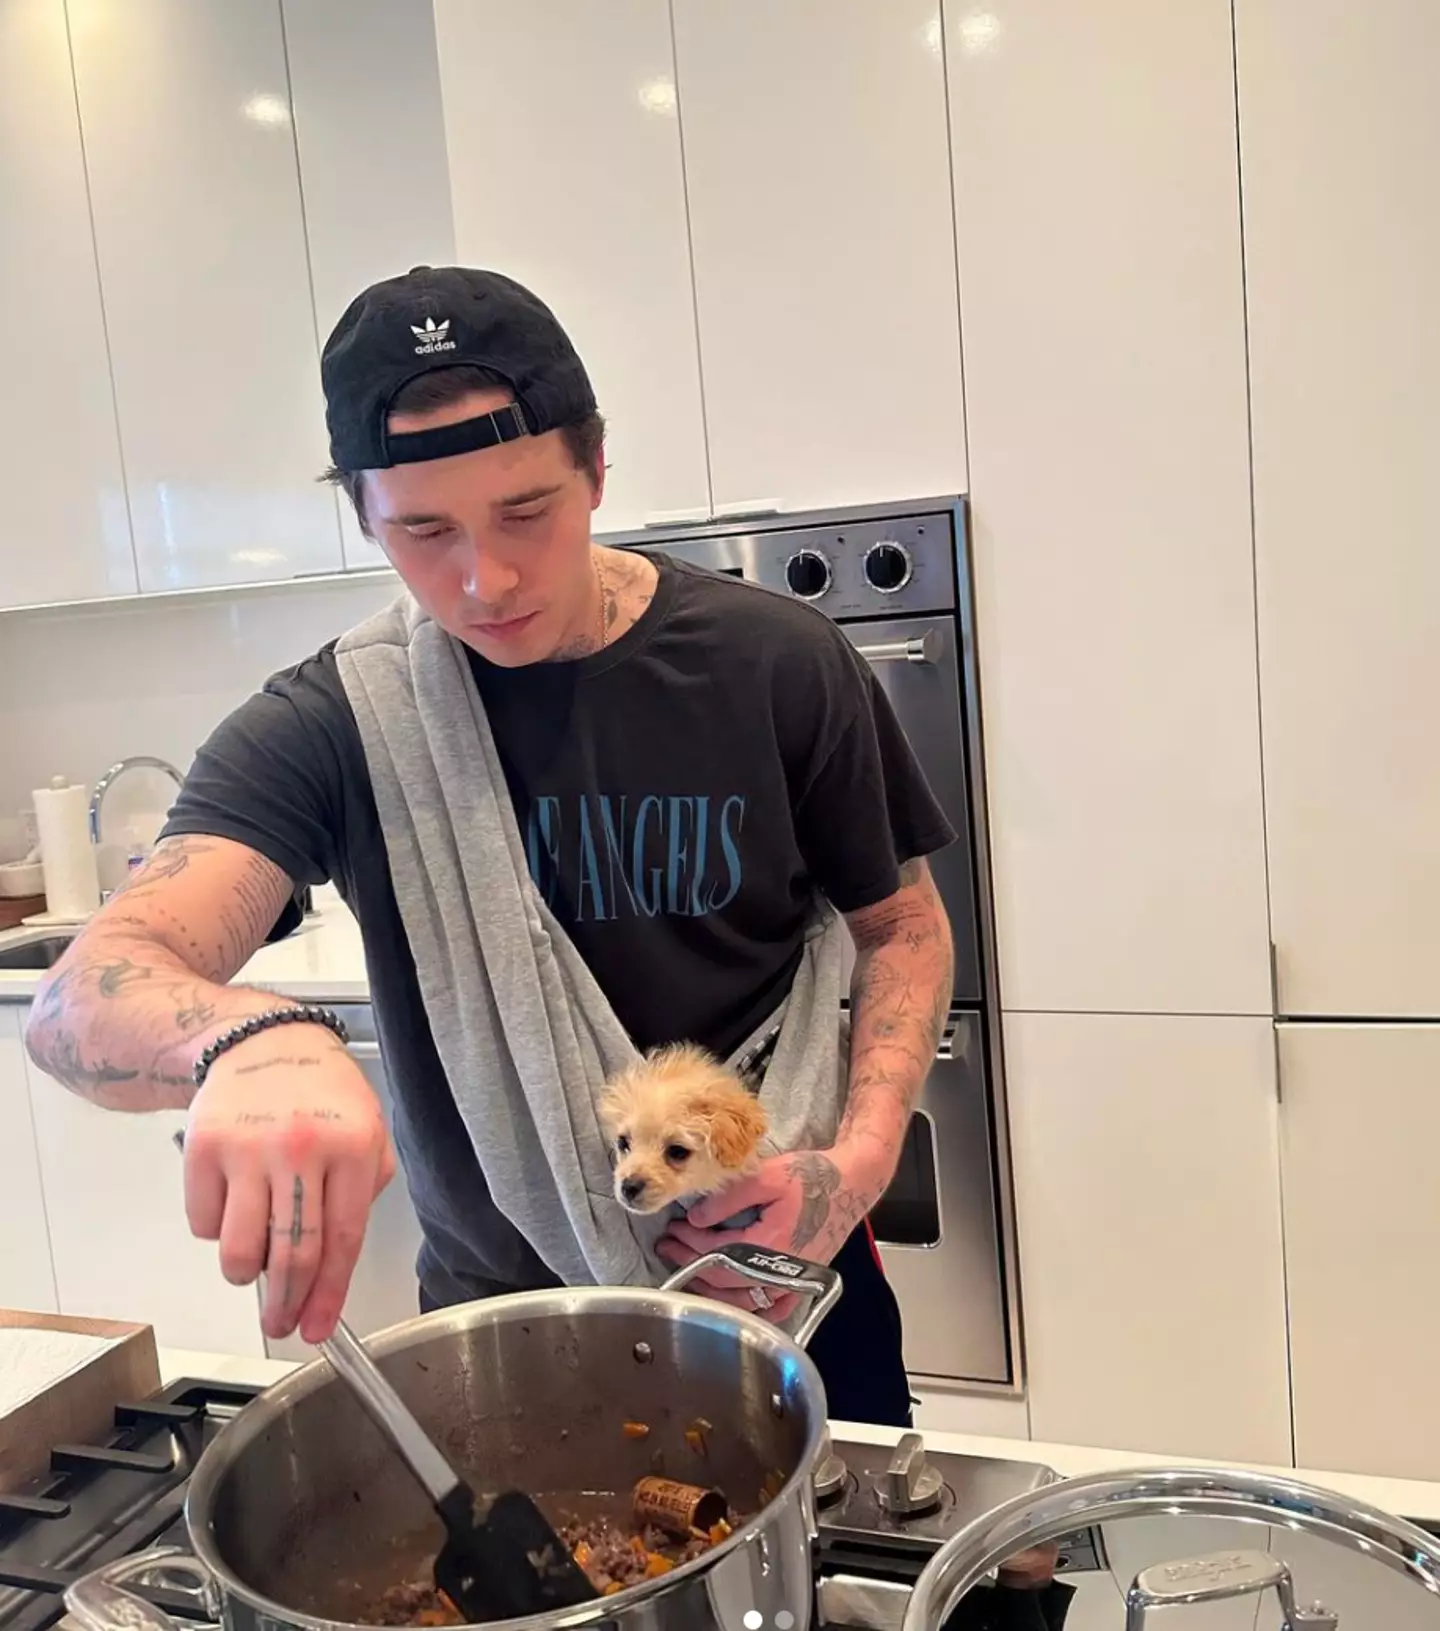 A cork could be seen floating in Brooklyn Beckham’s dish.